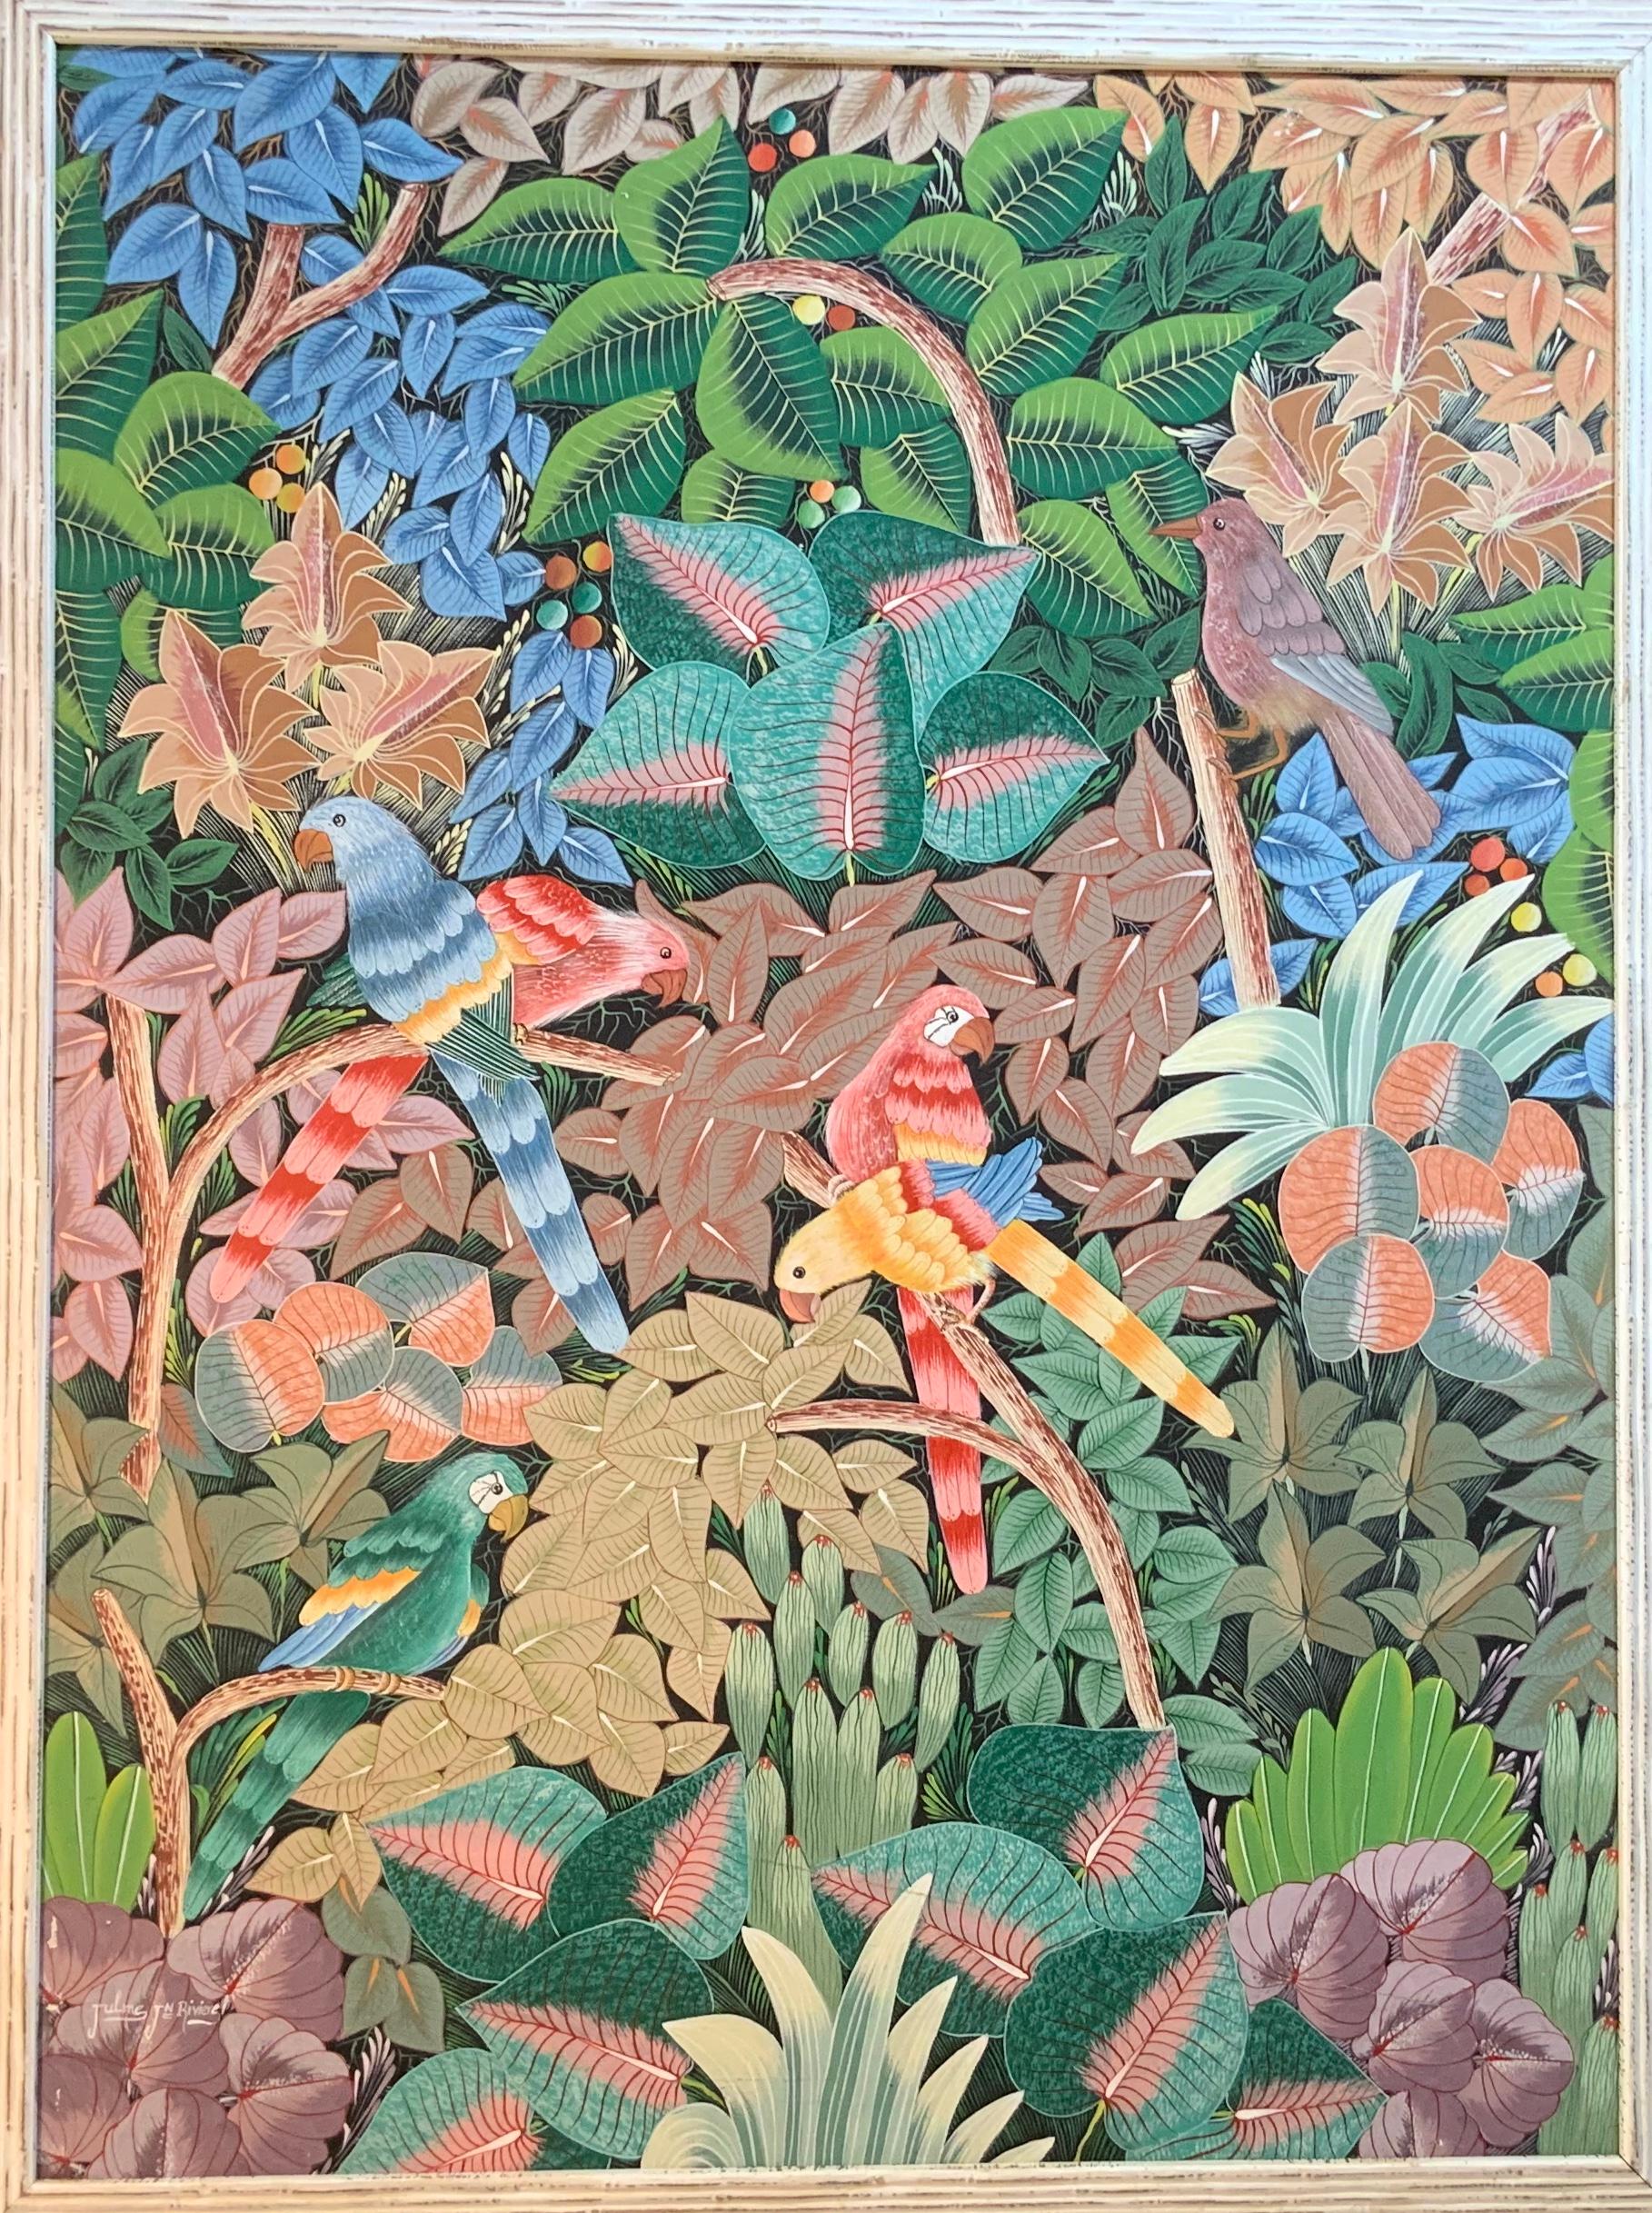 Exceptional oil painting on canvas by Haitian artist depicts lush green jungle with bright and vivid colorful parrots overlooking beautiful lush jungle, acrylic paint on canvas, with decorative bamboo like quality wood frame. Signed by the